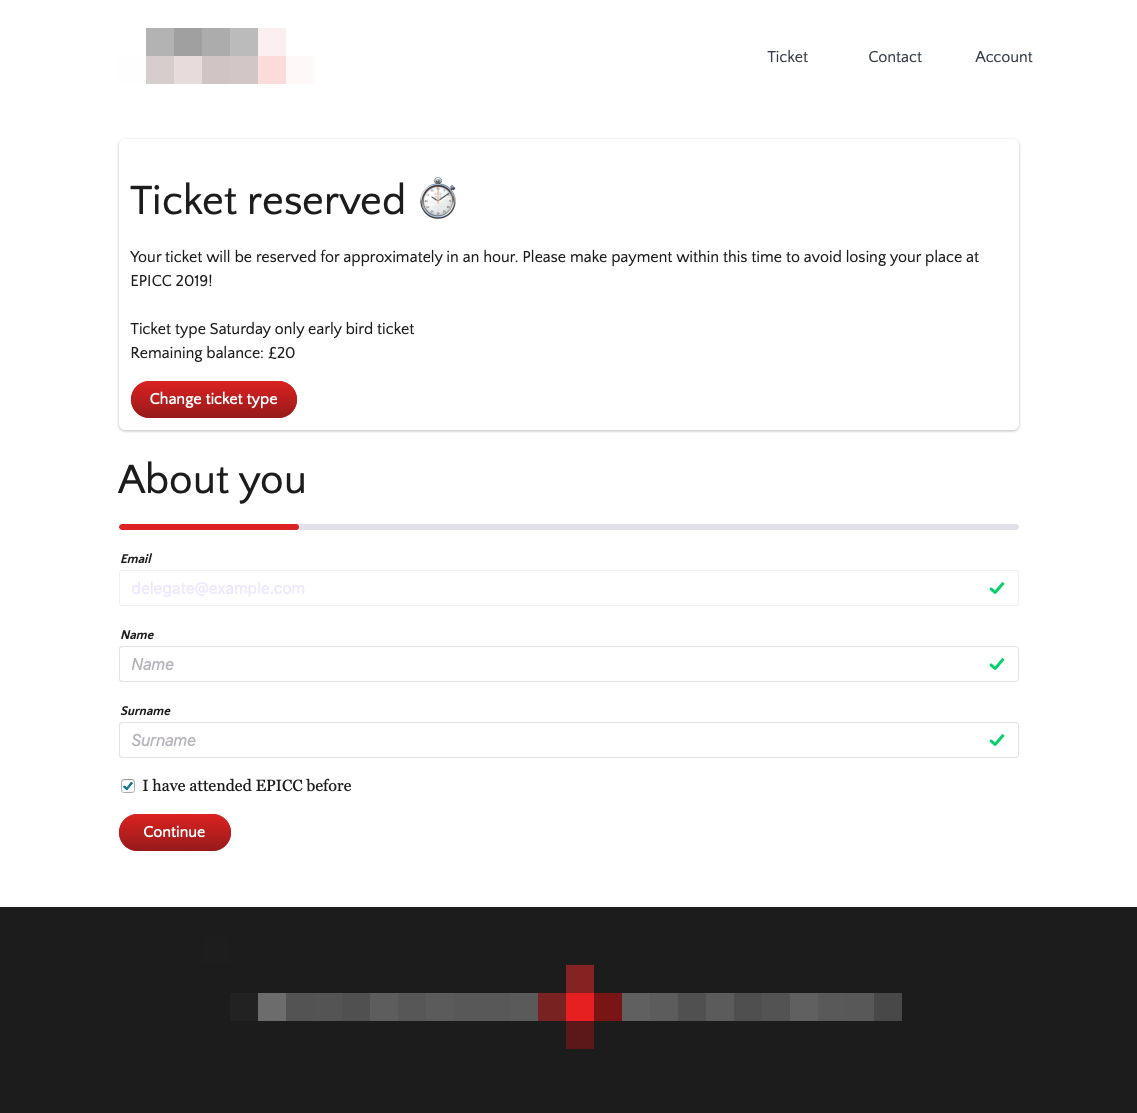 The EPICC conference ticket website showing a user their ticket reservation and asking for their registration details.